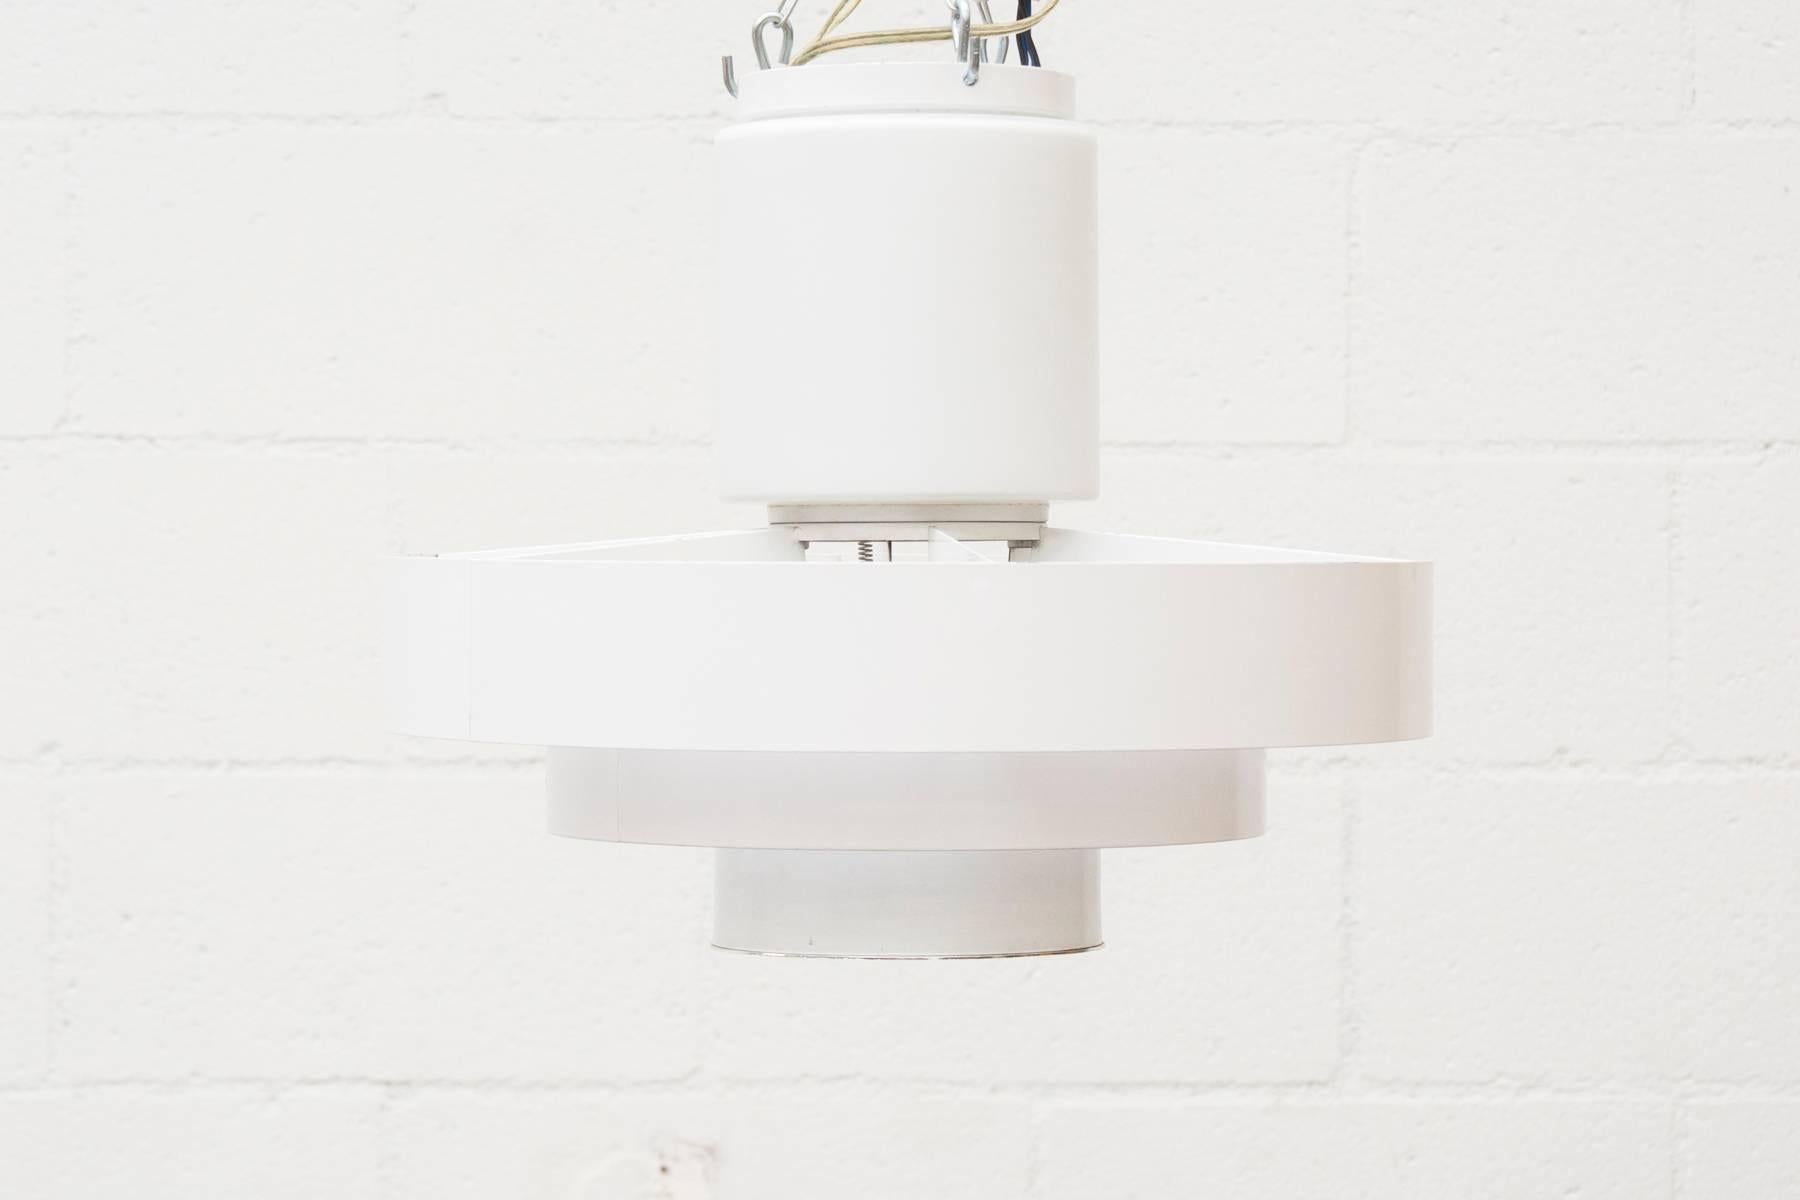 Eye-catching, Philips attributed, mid-century, flush mount industrial banded ceiling lamp outfitted with an opaline glass upper shade and a lower enameled metal shade with an inset reflector for spot light. A wonderful example of clear and clean